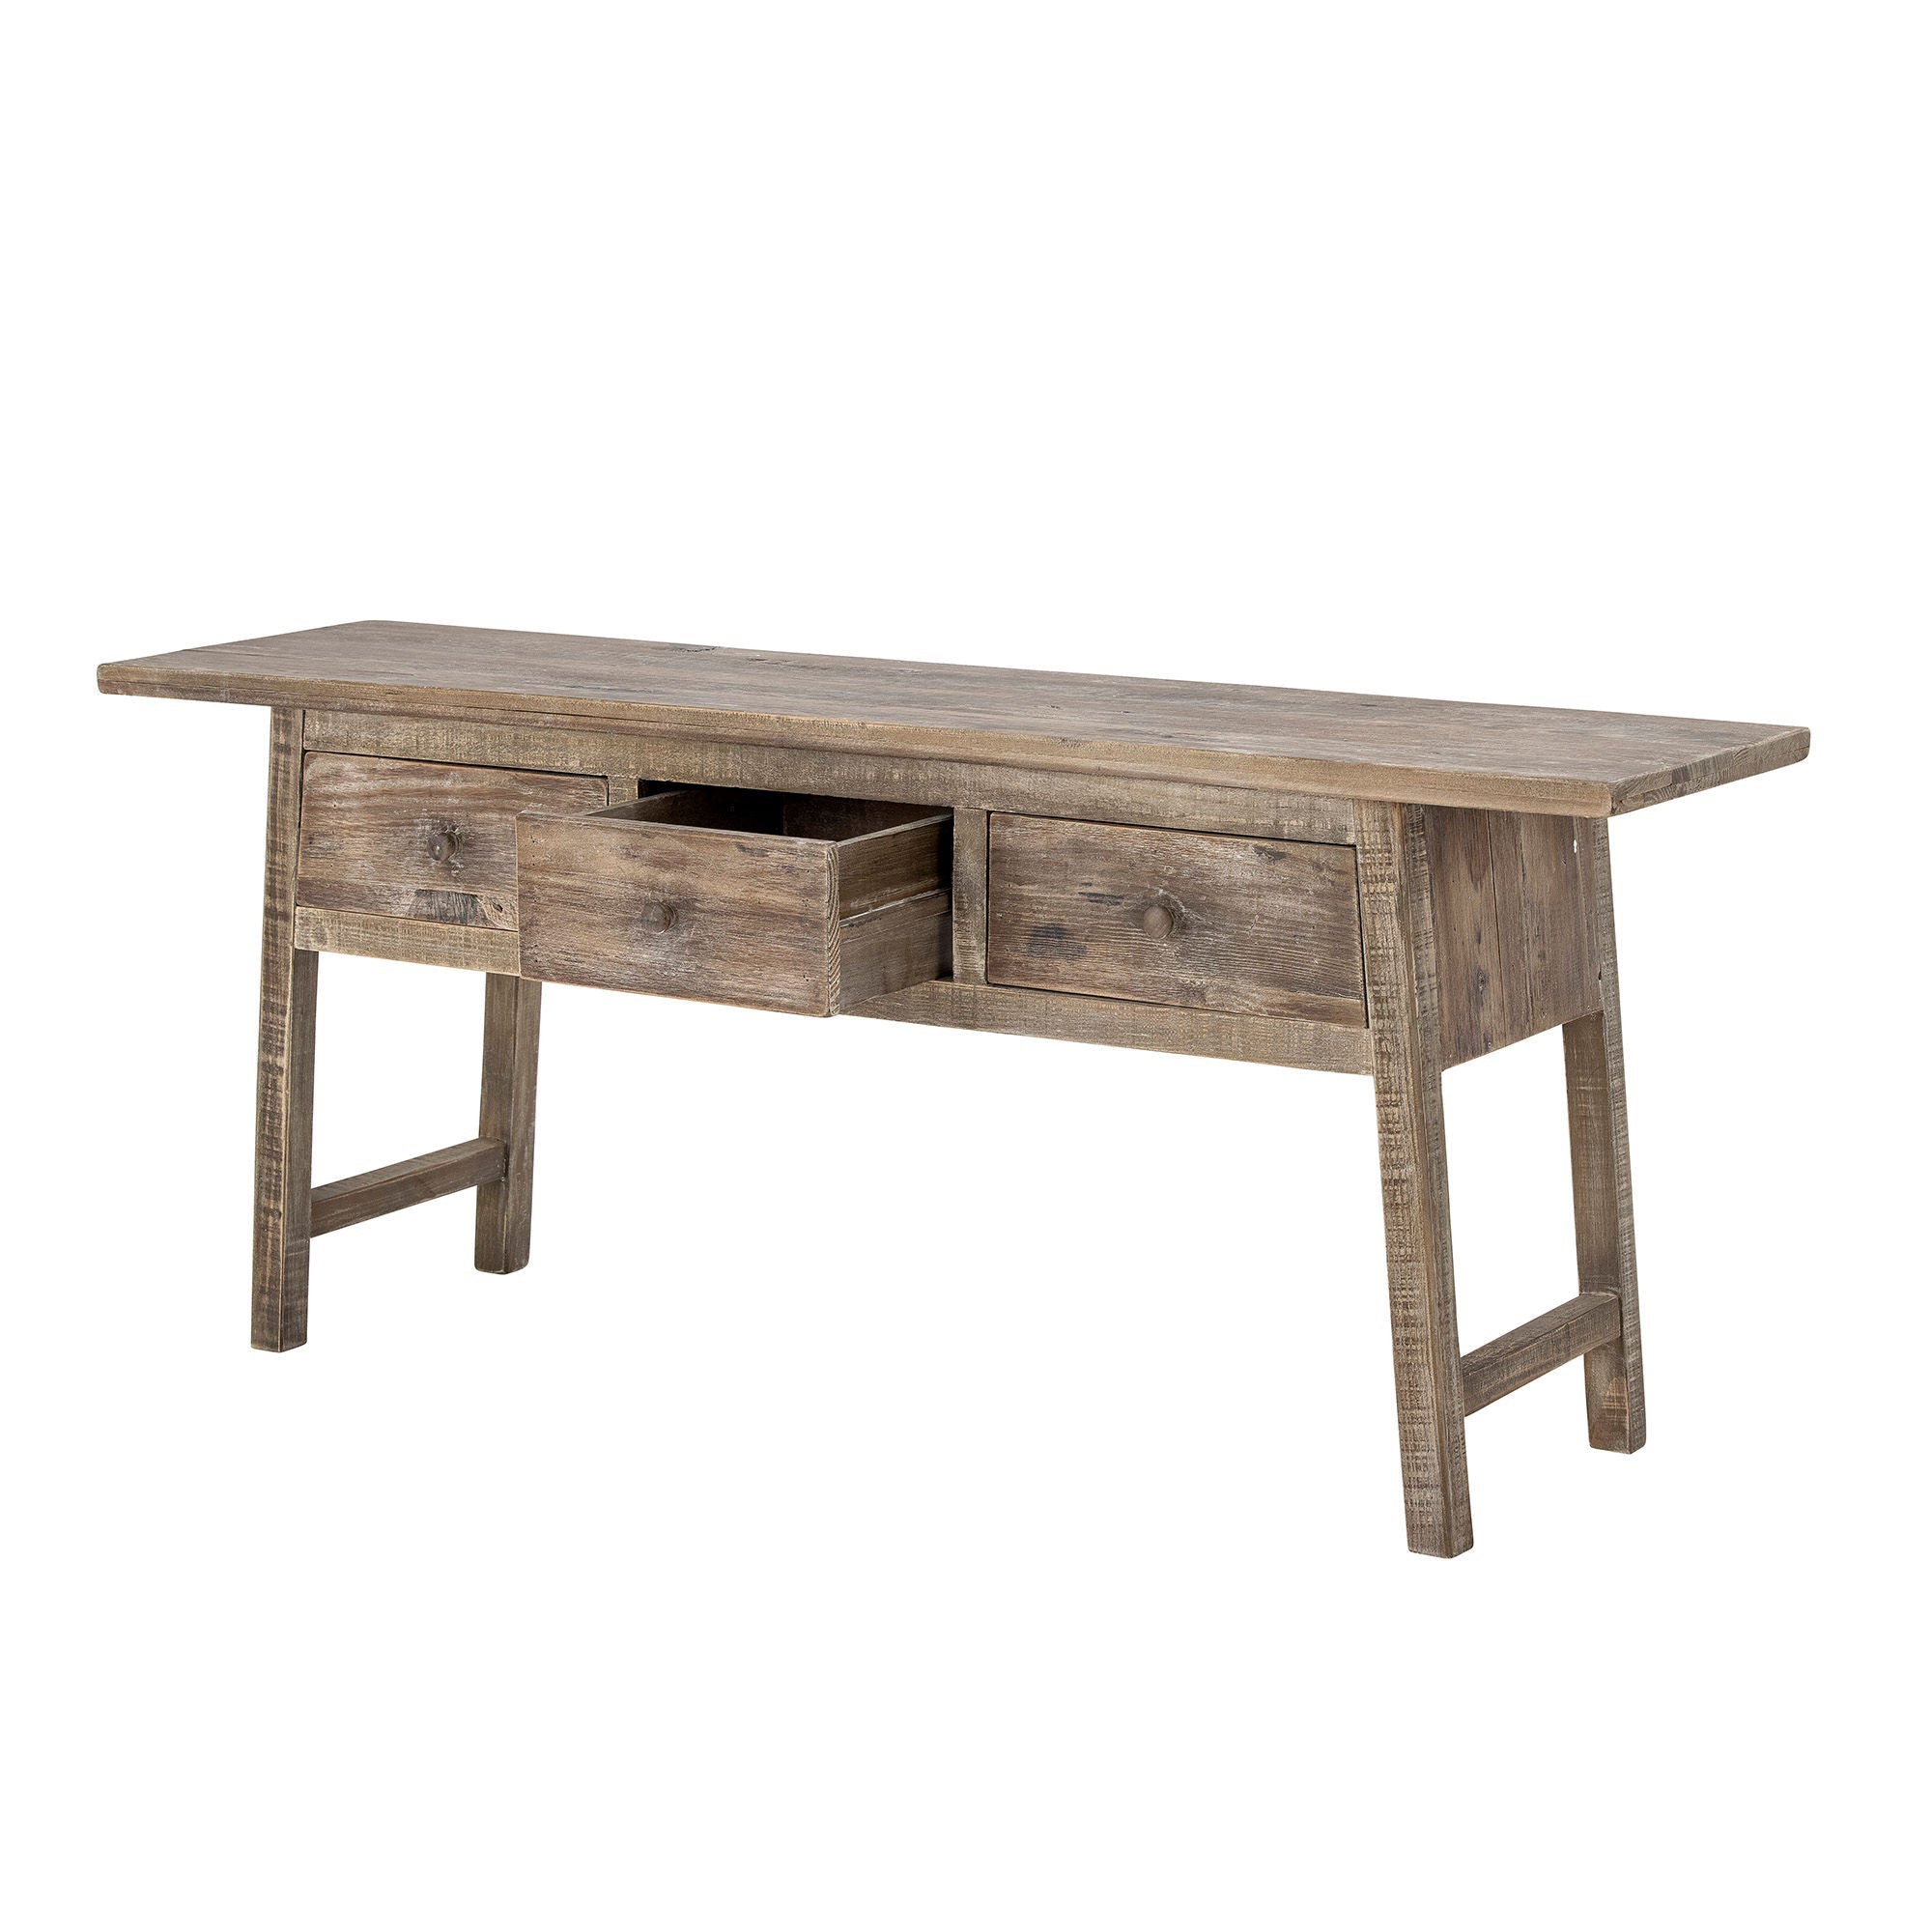 Creative Collection Camden Console Table, Nature, Reclaimed Pine Wood